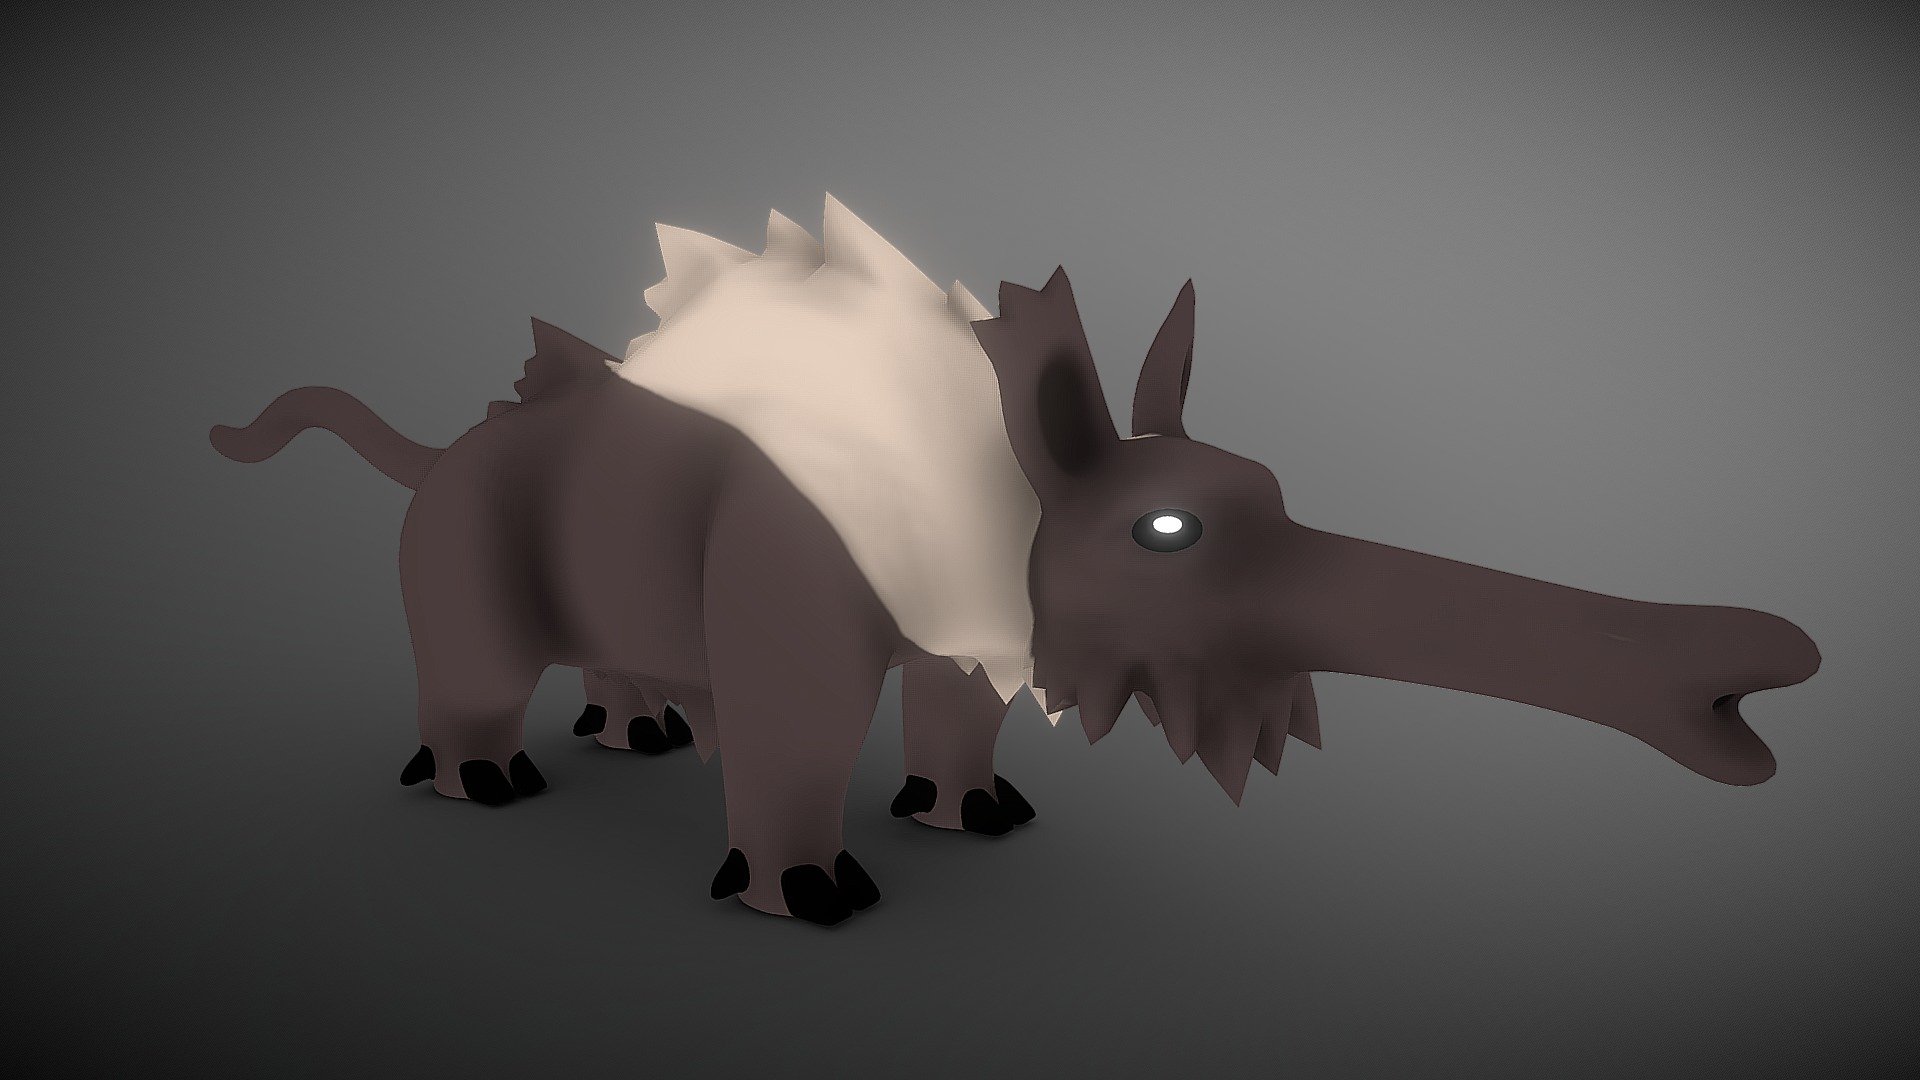 Another creature feature for the Totem project.

&ldquo;Puffer pigs are a common sight out on the grass lands in valleys if the more mountainous terrain of the islands.

The pigs have a unique ability to inflate to a creatures almost three times their size. Both as a mode of transit between islands and as a defense mechanism to evade prey.

Though they cannot fly in this state, the initial act of their puffing usually gives them an boost high off the ground. Whatever hight they reach they can maintain almost indefinitely so long as they stay puffed in the air.

Once they let up they fall down by a distance proportional to ratio of air they let out.